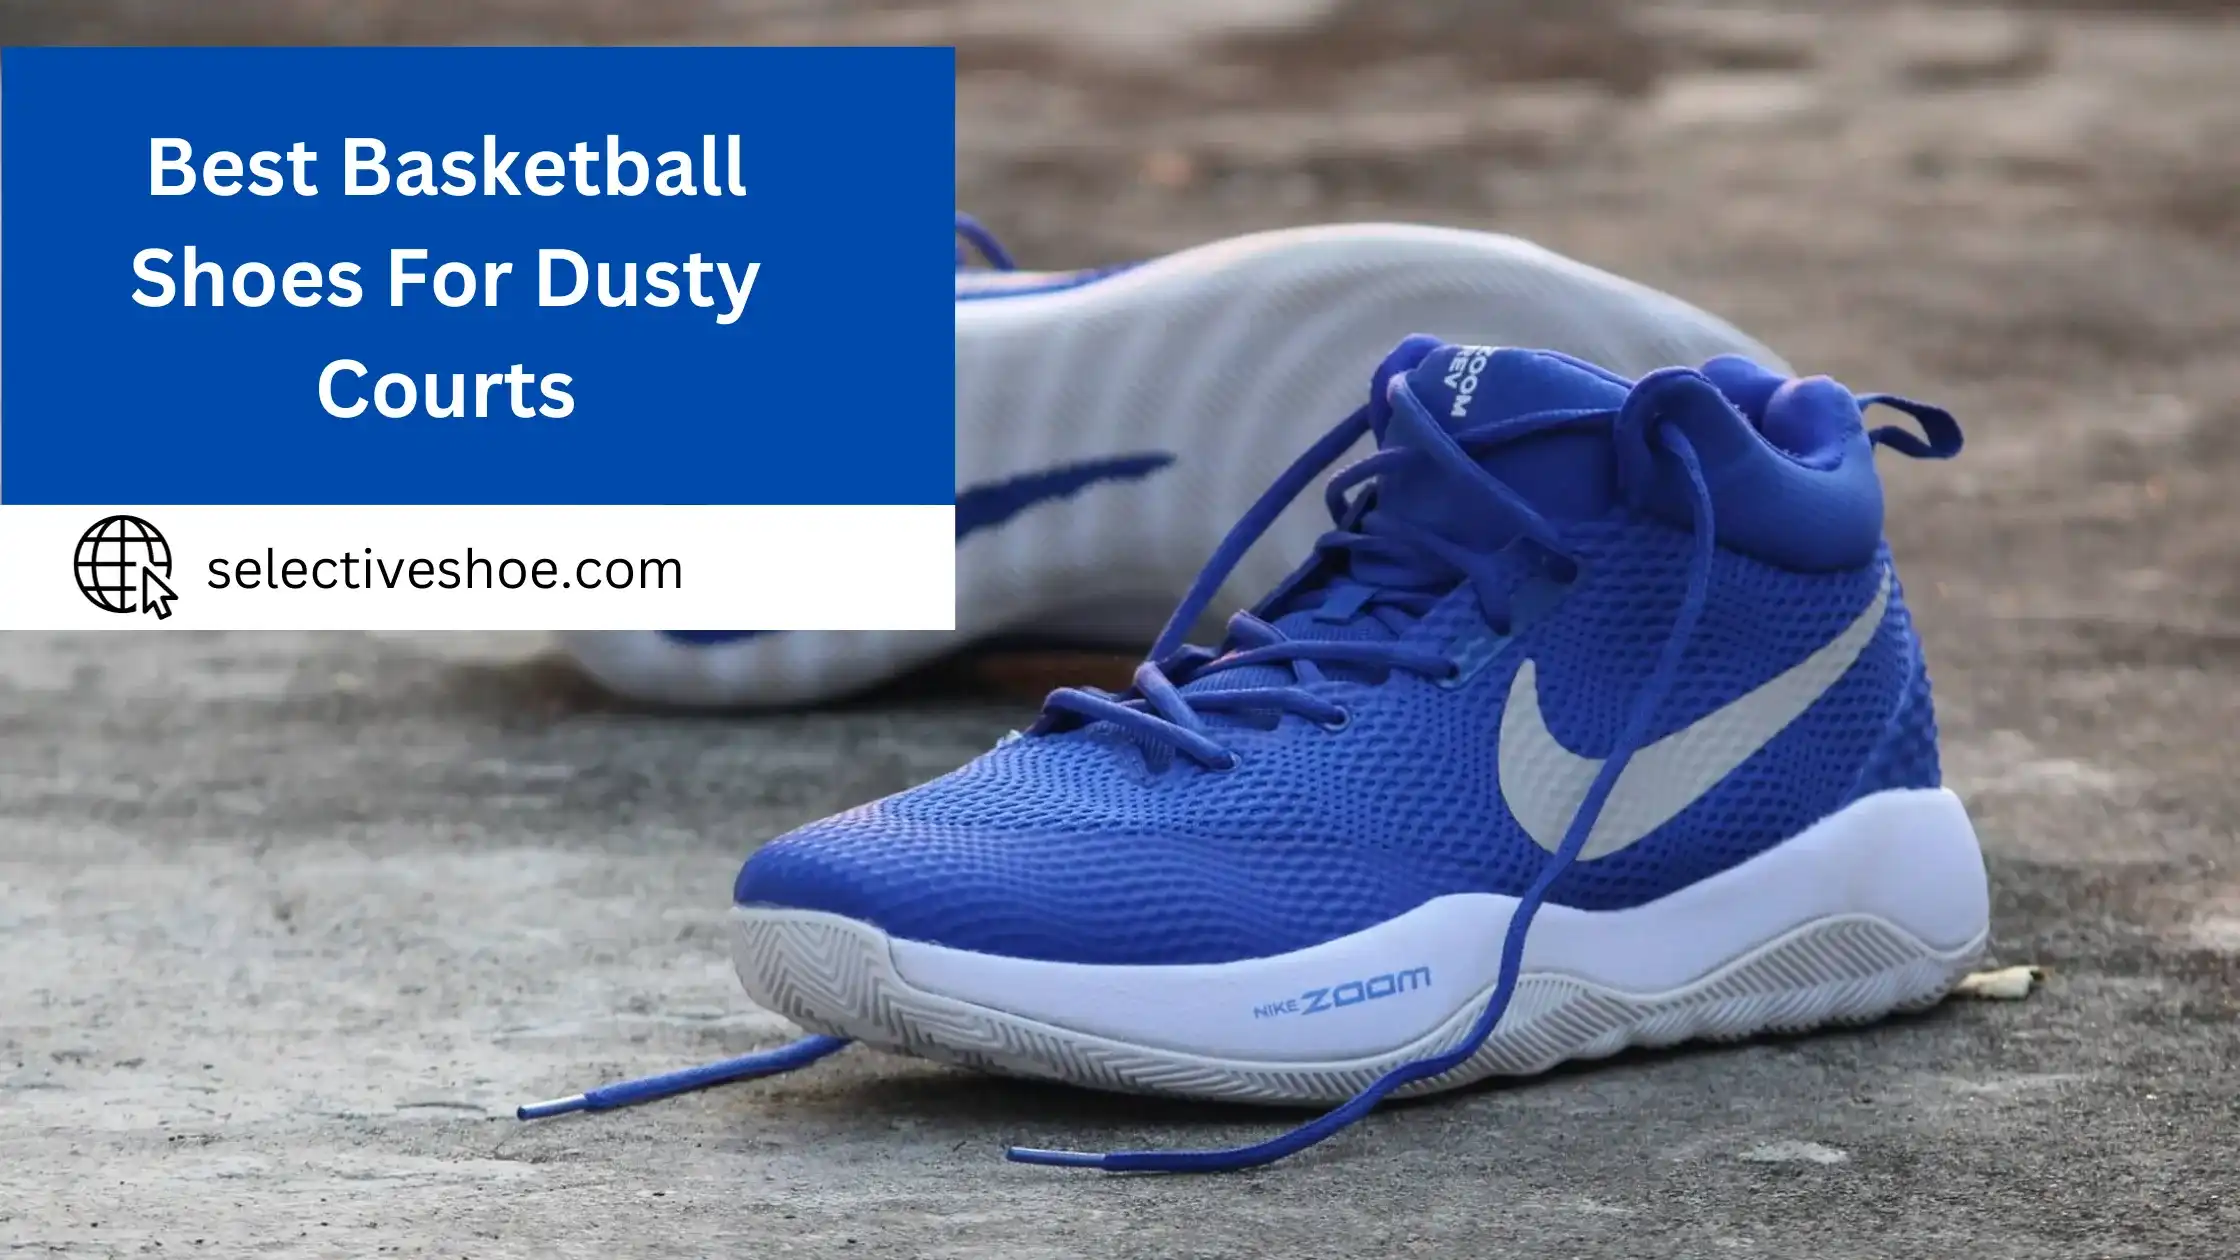 Best Basketball Shoes For Dusty Courts - (Complete Reviews)